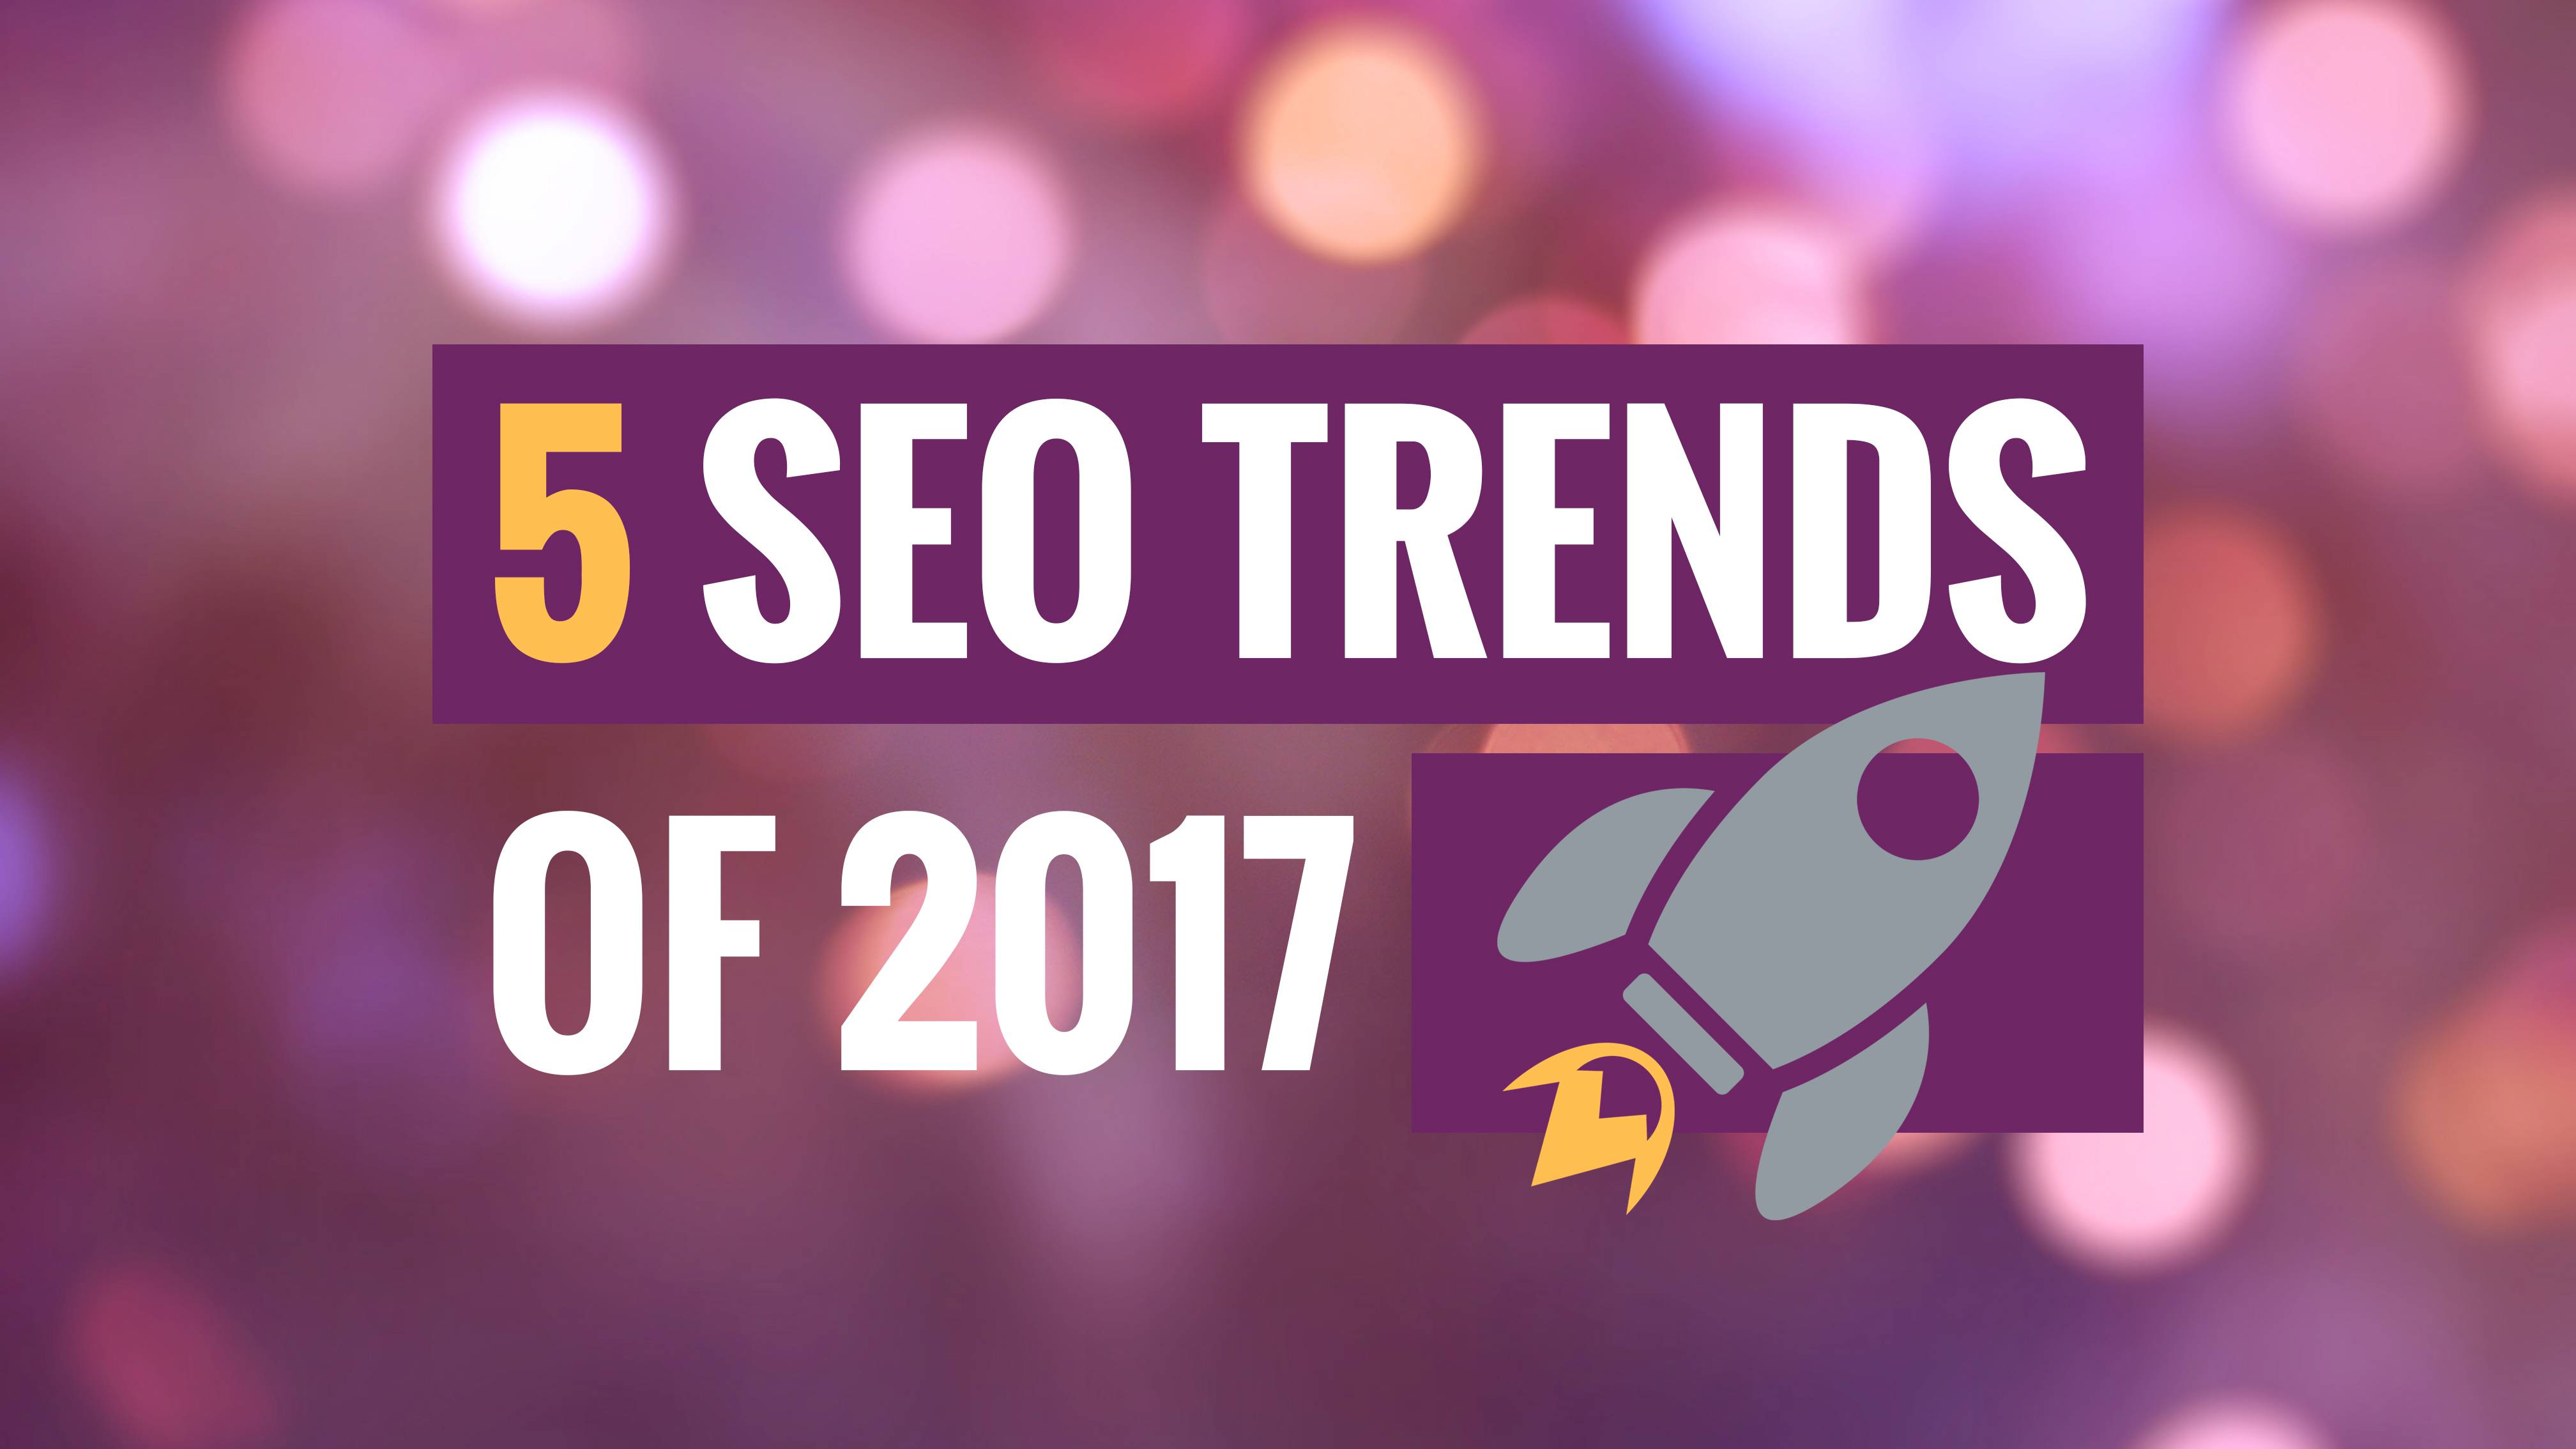 5-seo-trends-of-2017-to-keep-your-business-on-top